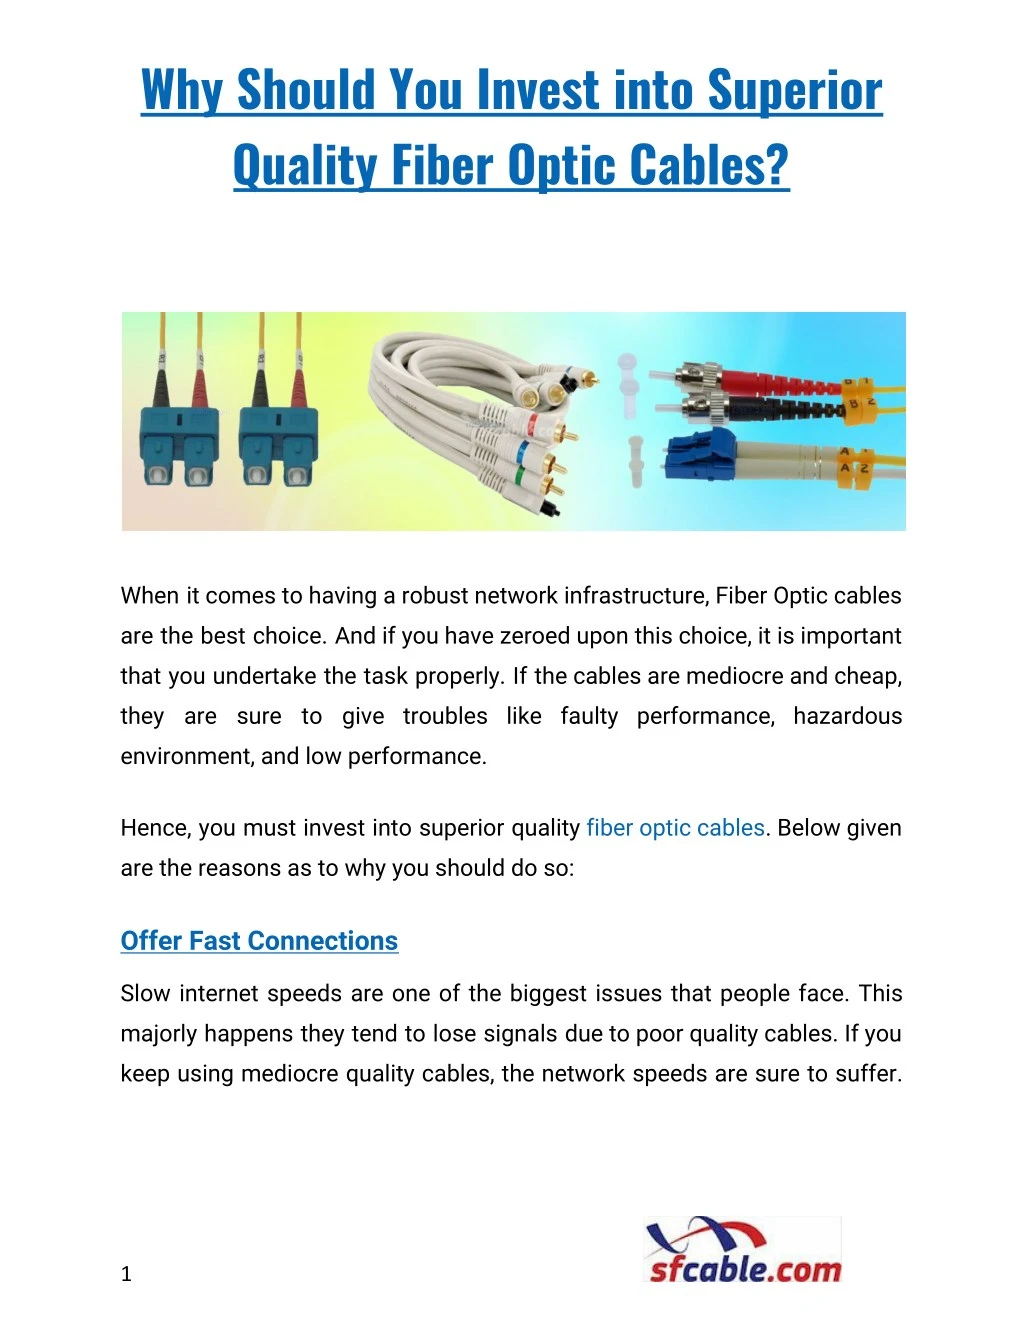 why should you invest into superior quality fiber